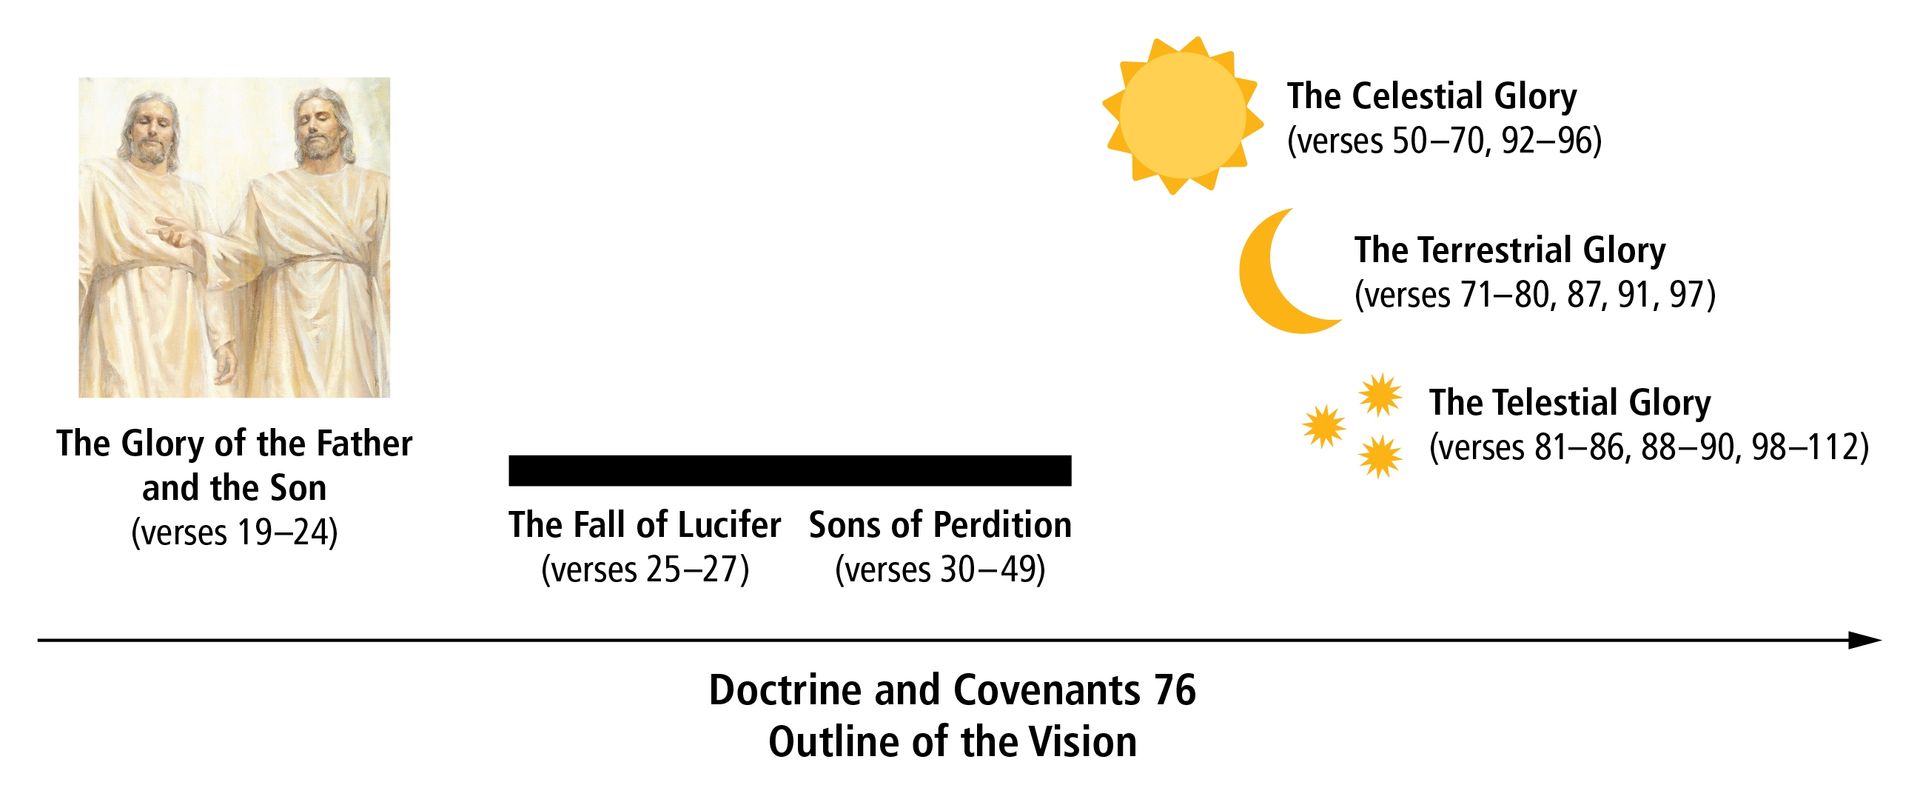 A diagram outlining the vision recorded in Doctrine and Covenants 76.